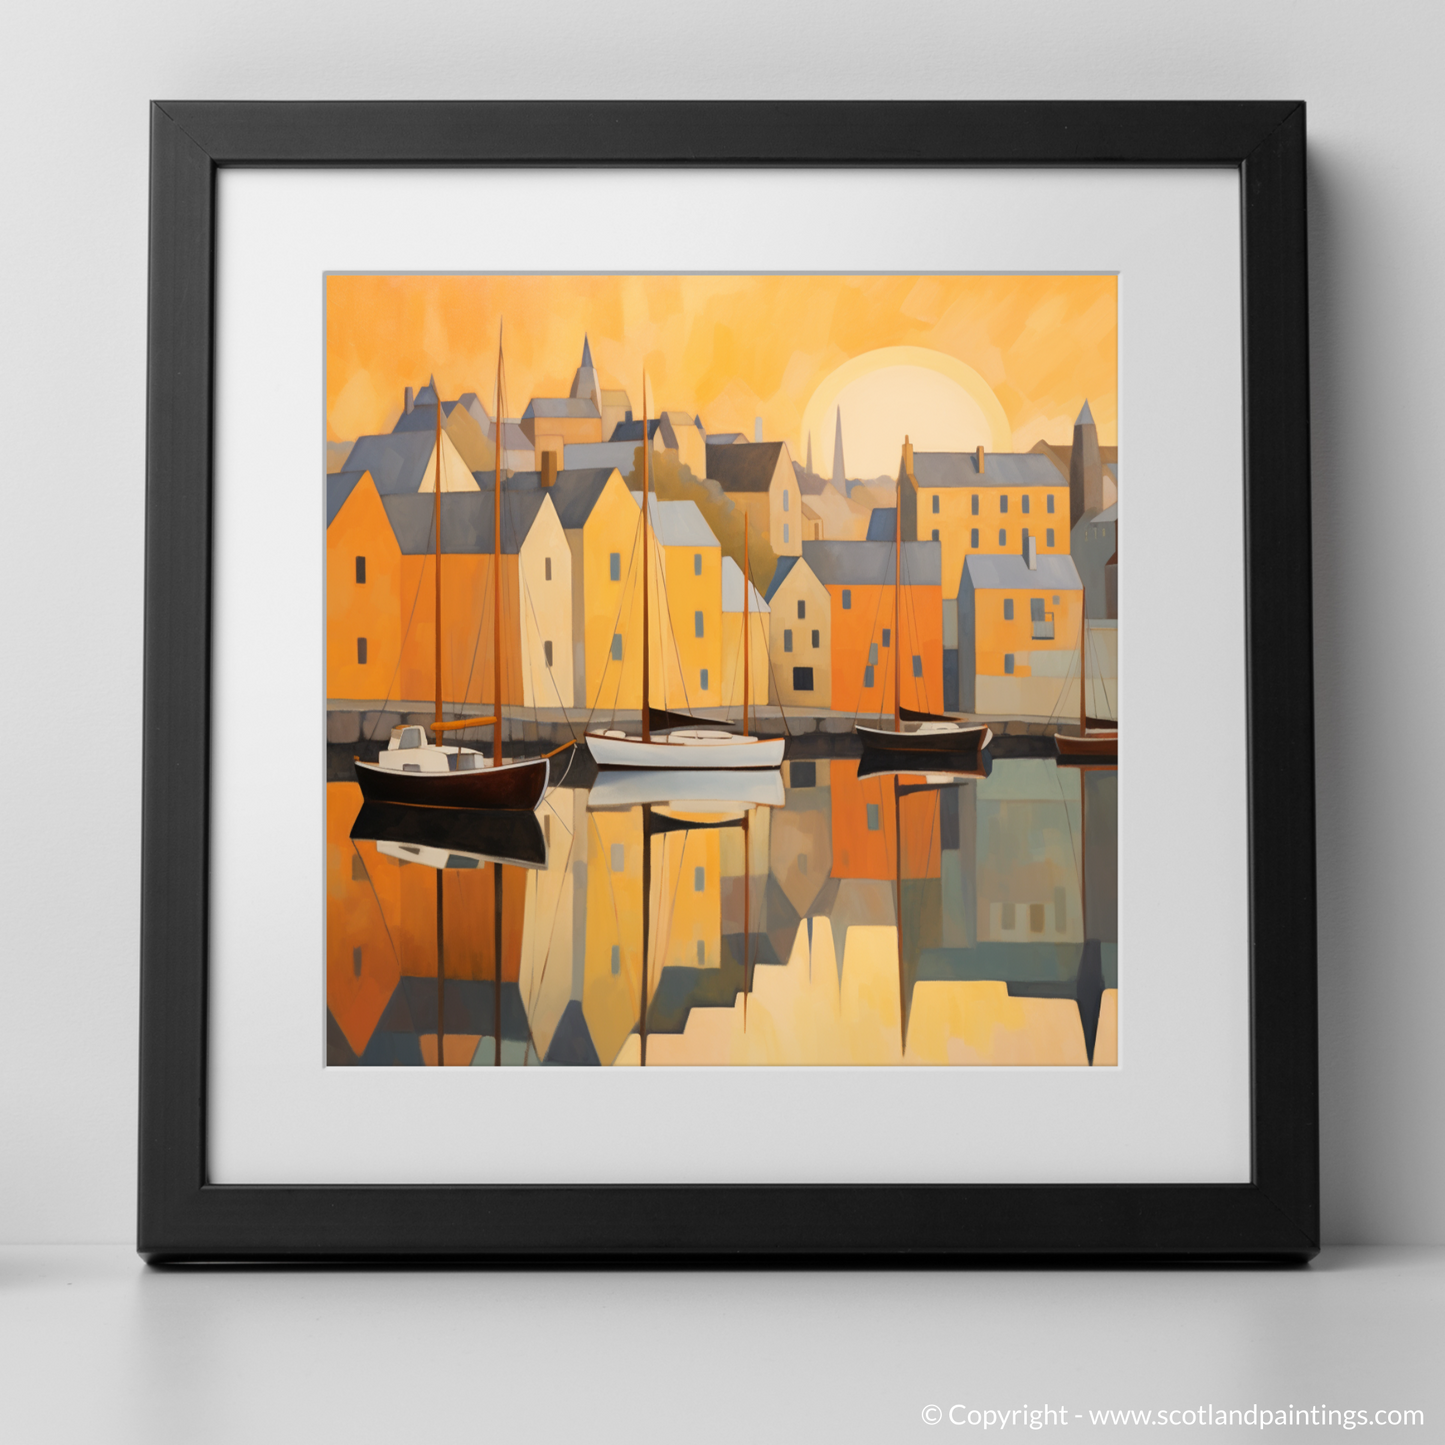 Tobermory Harbour at Twilight: A Minimalist Tribute